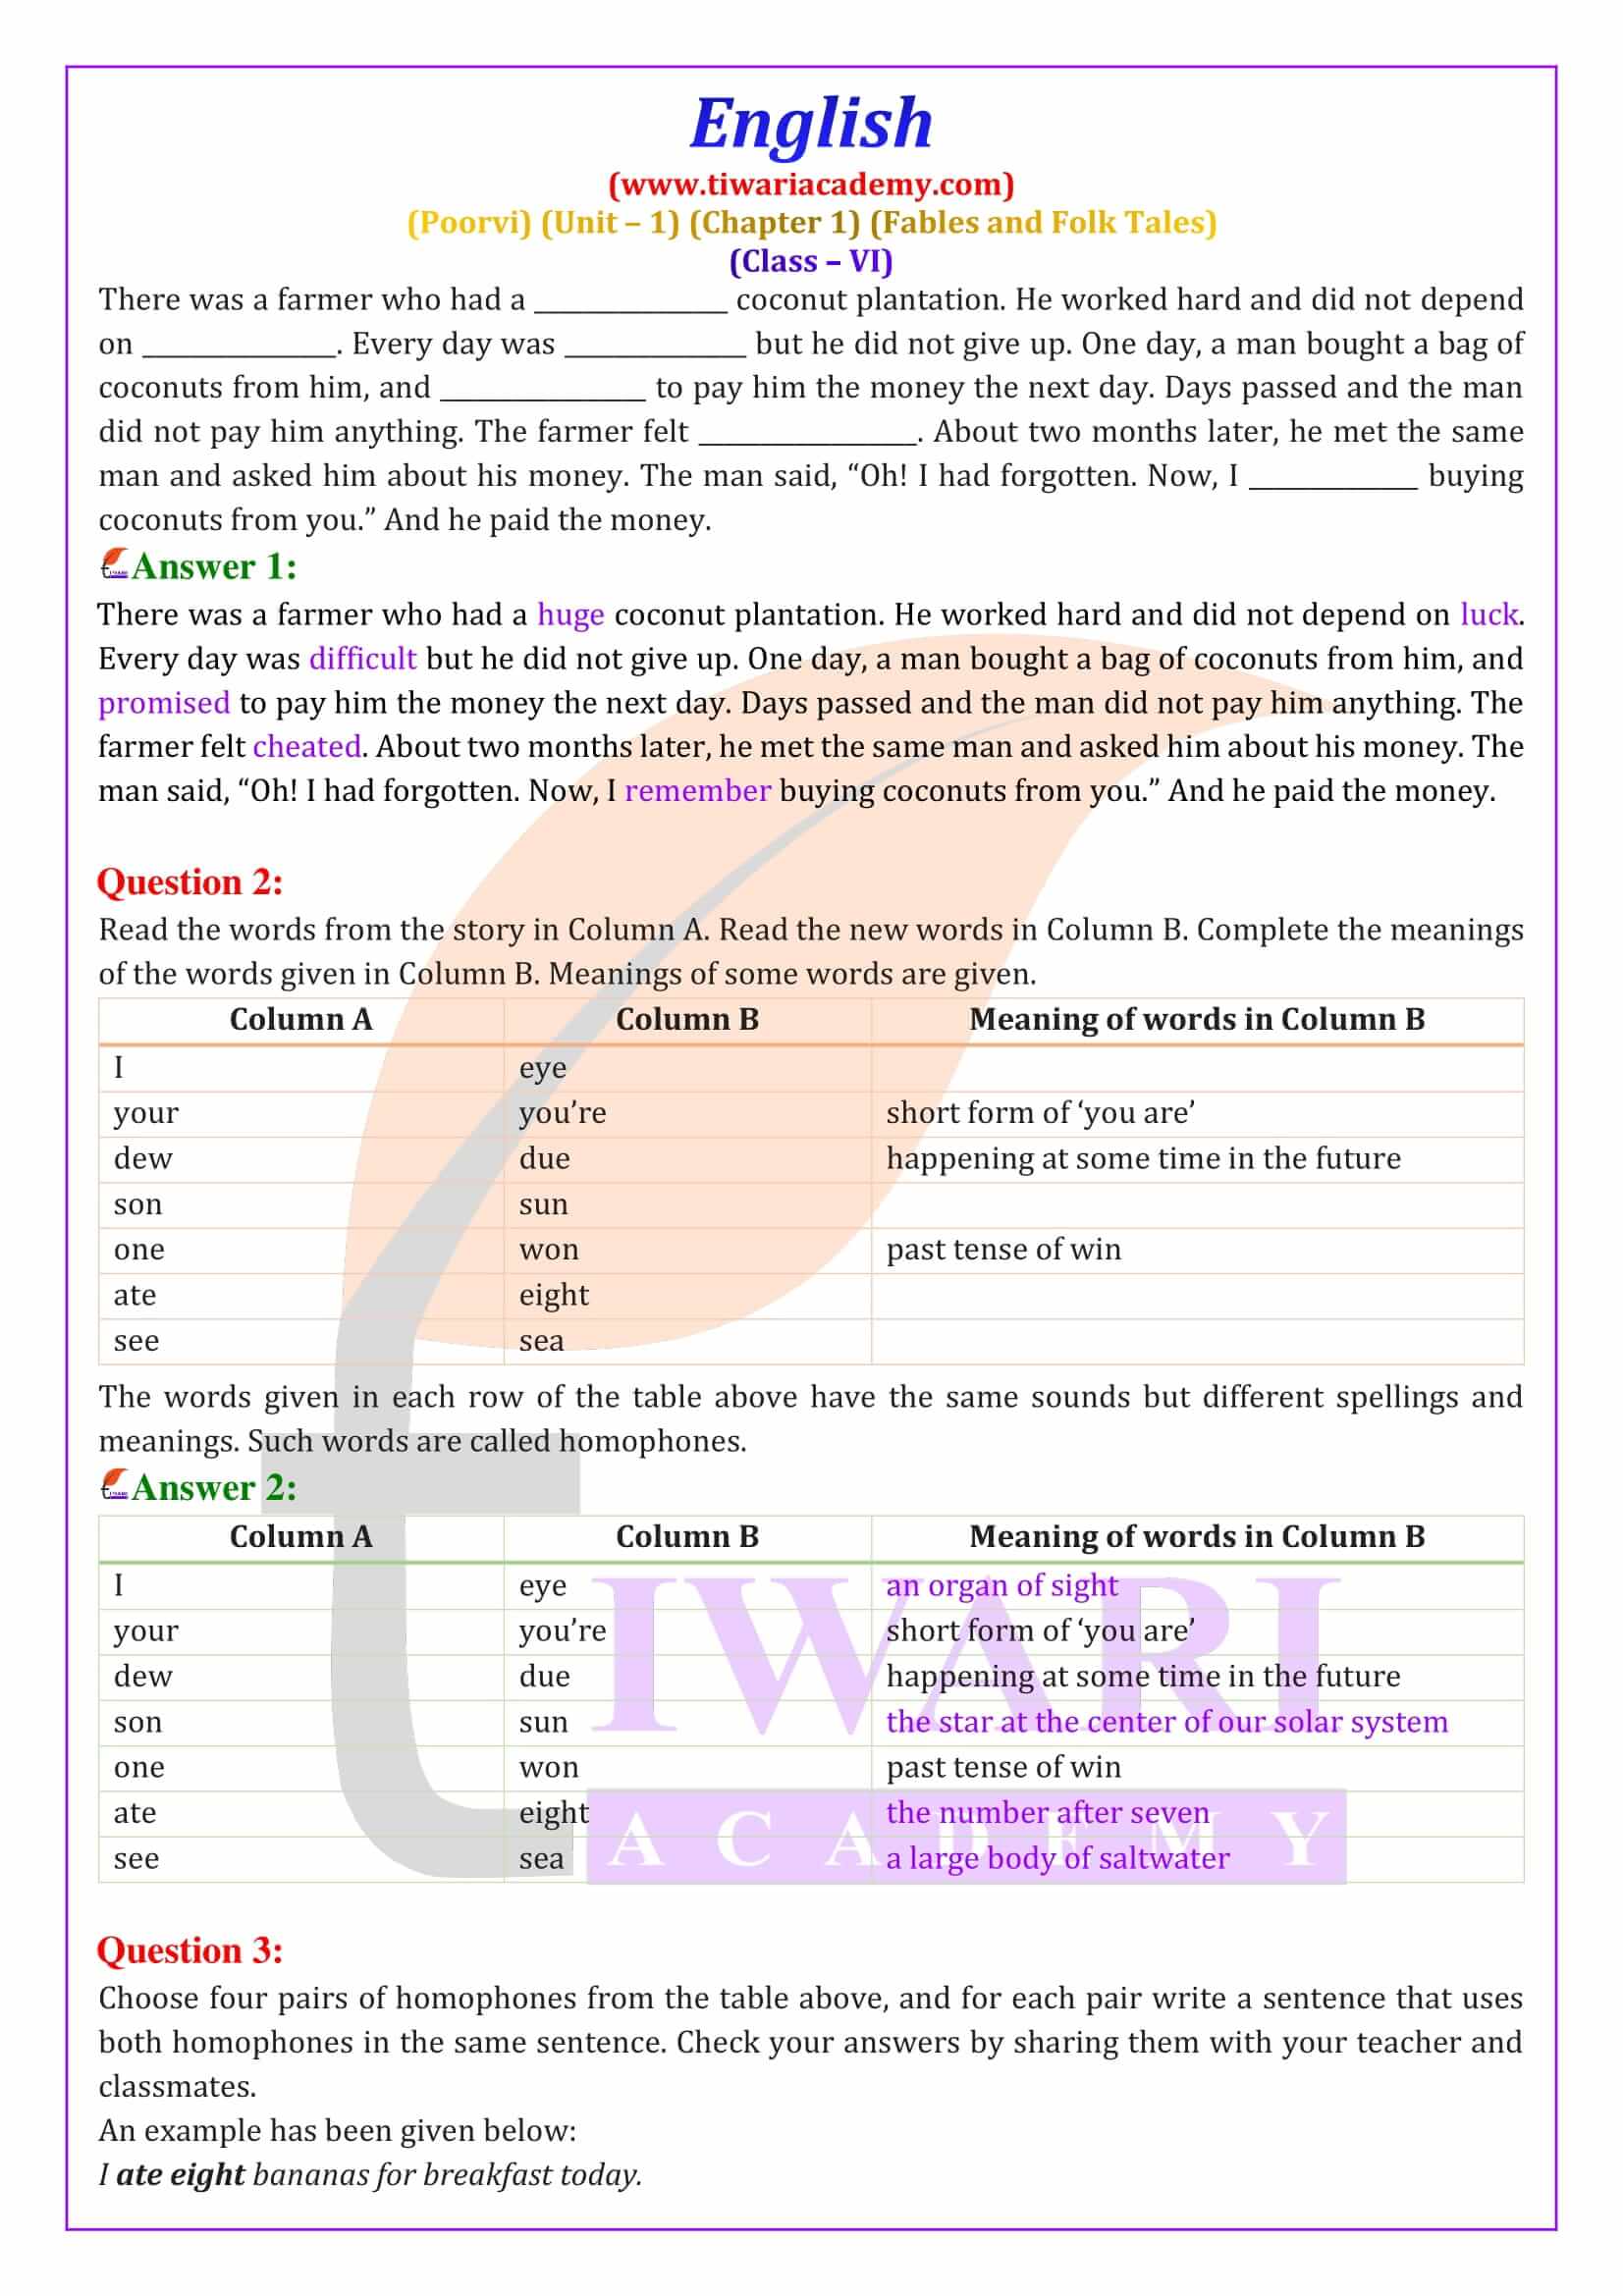 Class 6 English Poorvi Unit 1 Fables and Folk Tales Chapter 1 A Bottle of Dew Guide answers